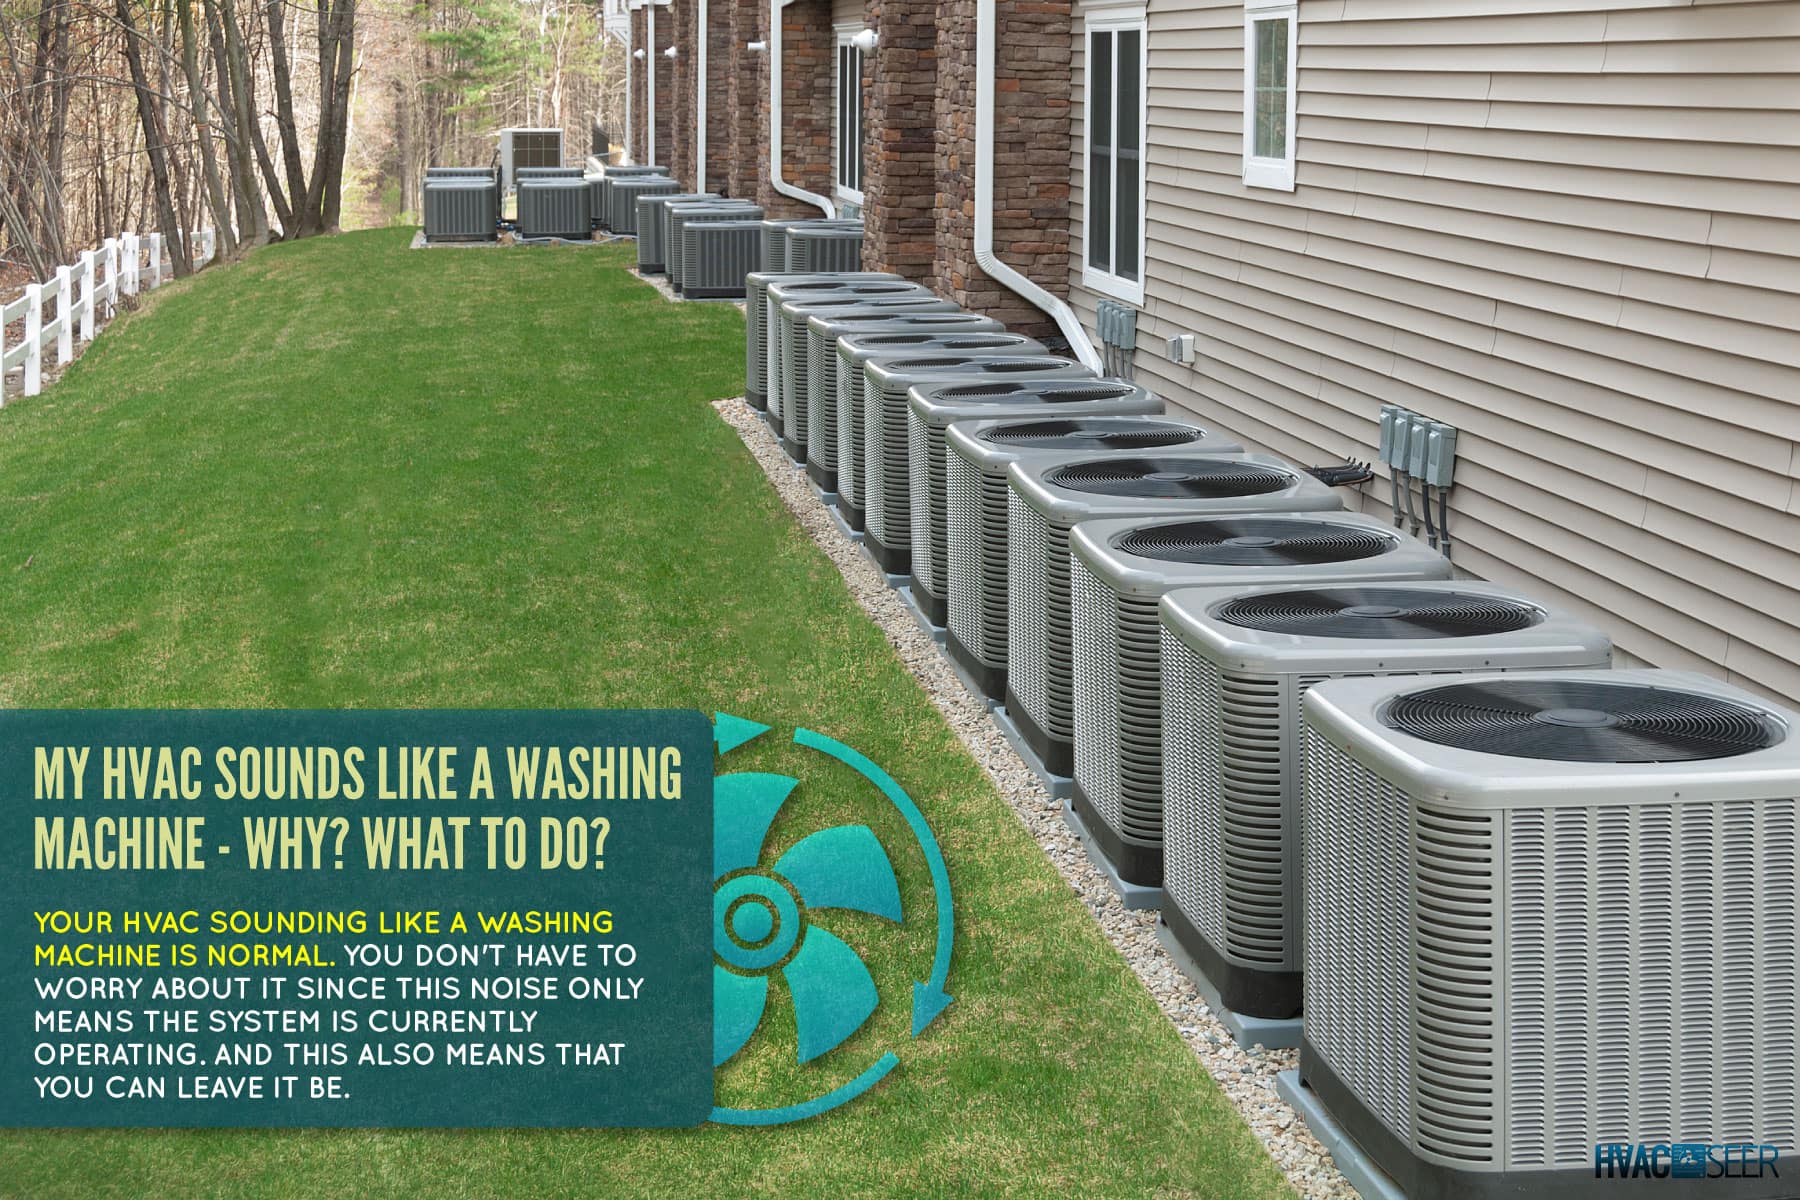 outdoor-air-conditioning-heat-pump-units, My HVAC Sounds Like A Washing Machine - Why? What To Do?